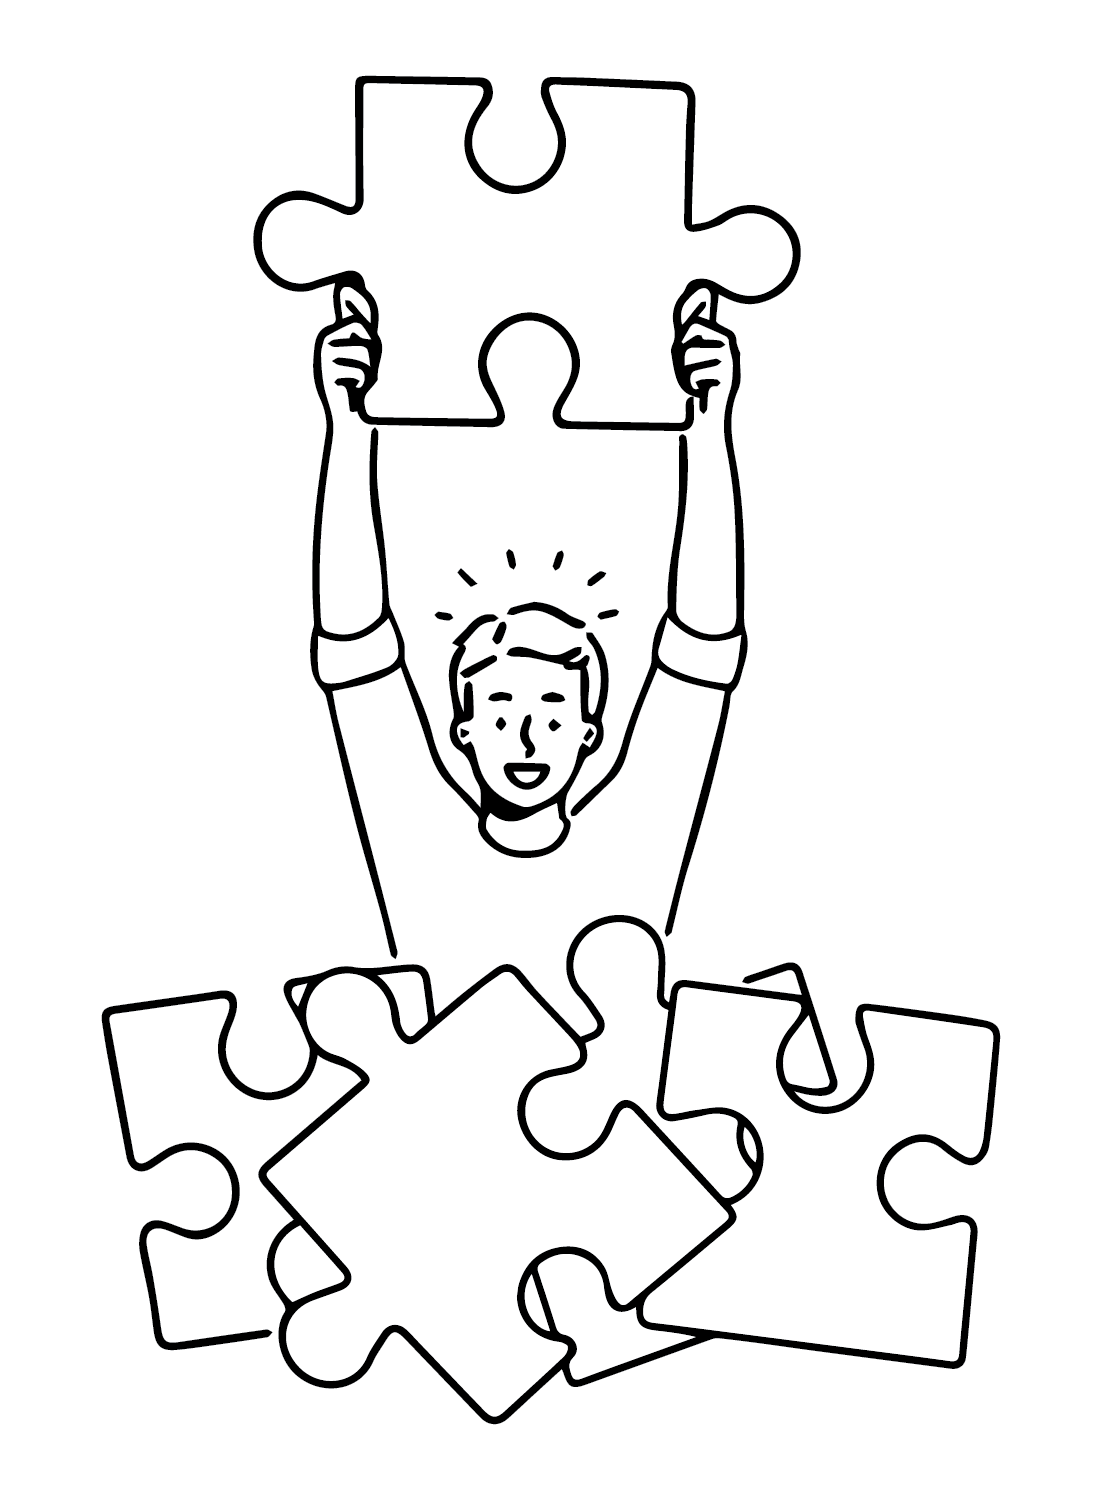 Printable Jigsaw Puzzle Coloring Page